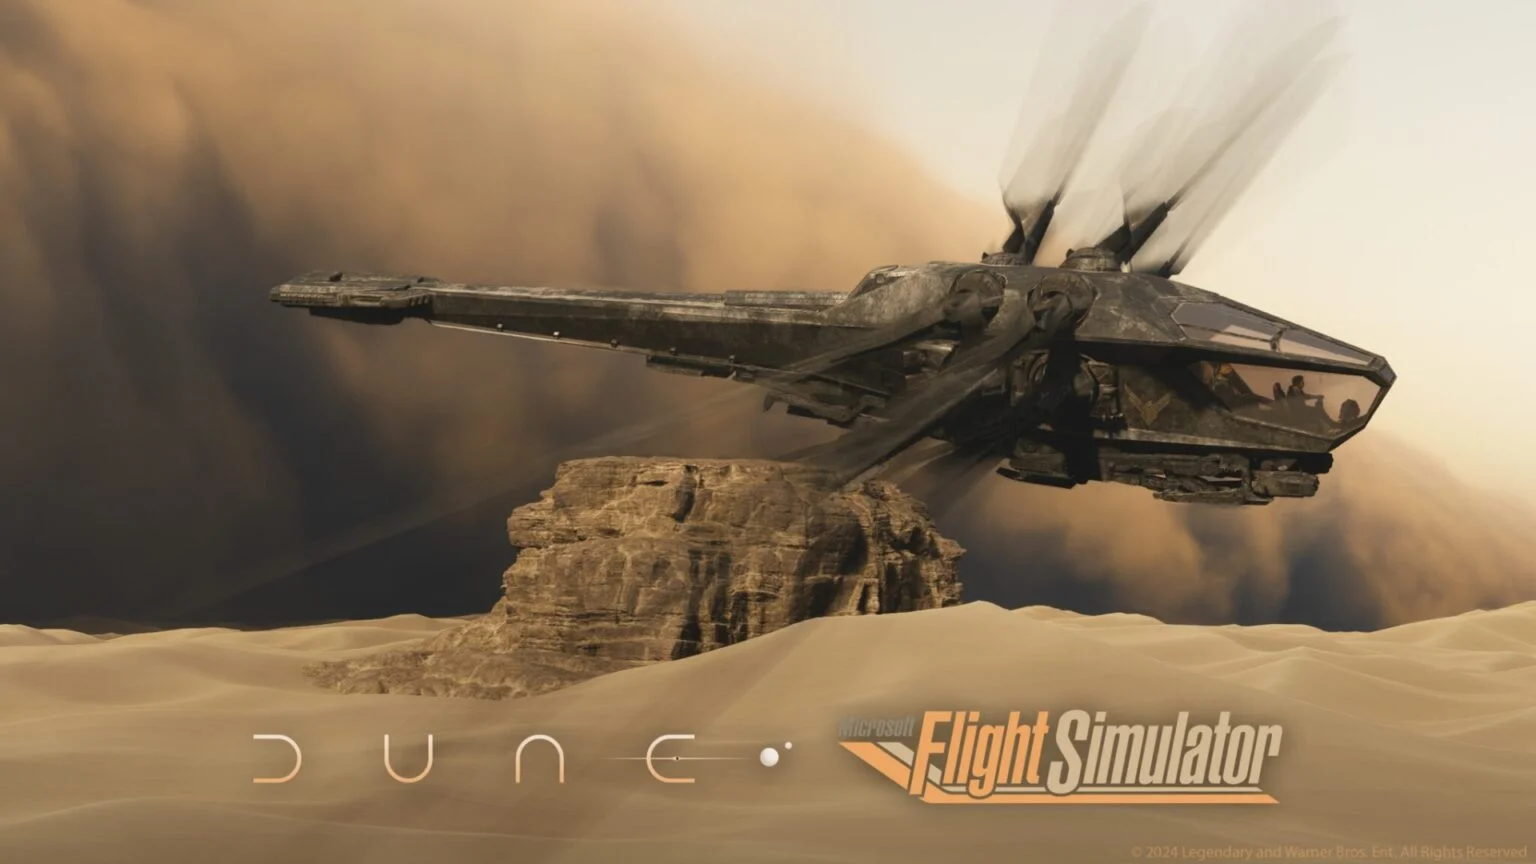 DLC has been released for Microsoft Flight Simulator in honor of the release of the film Dune: Part Two